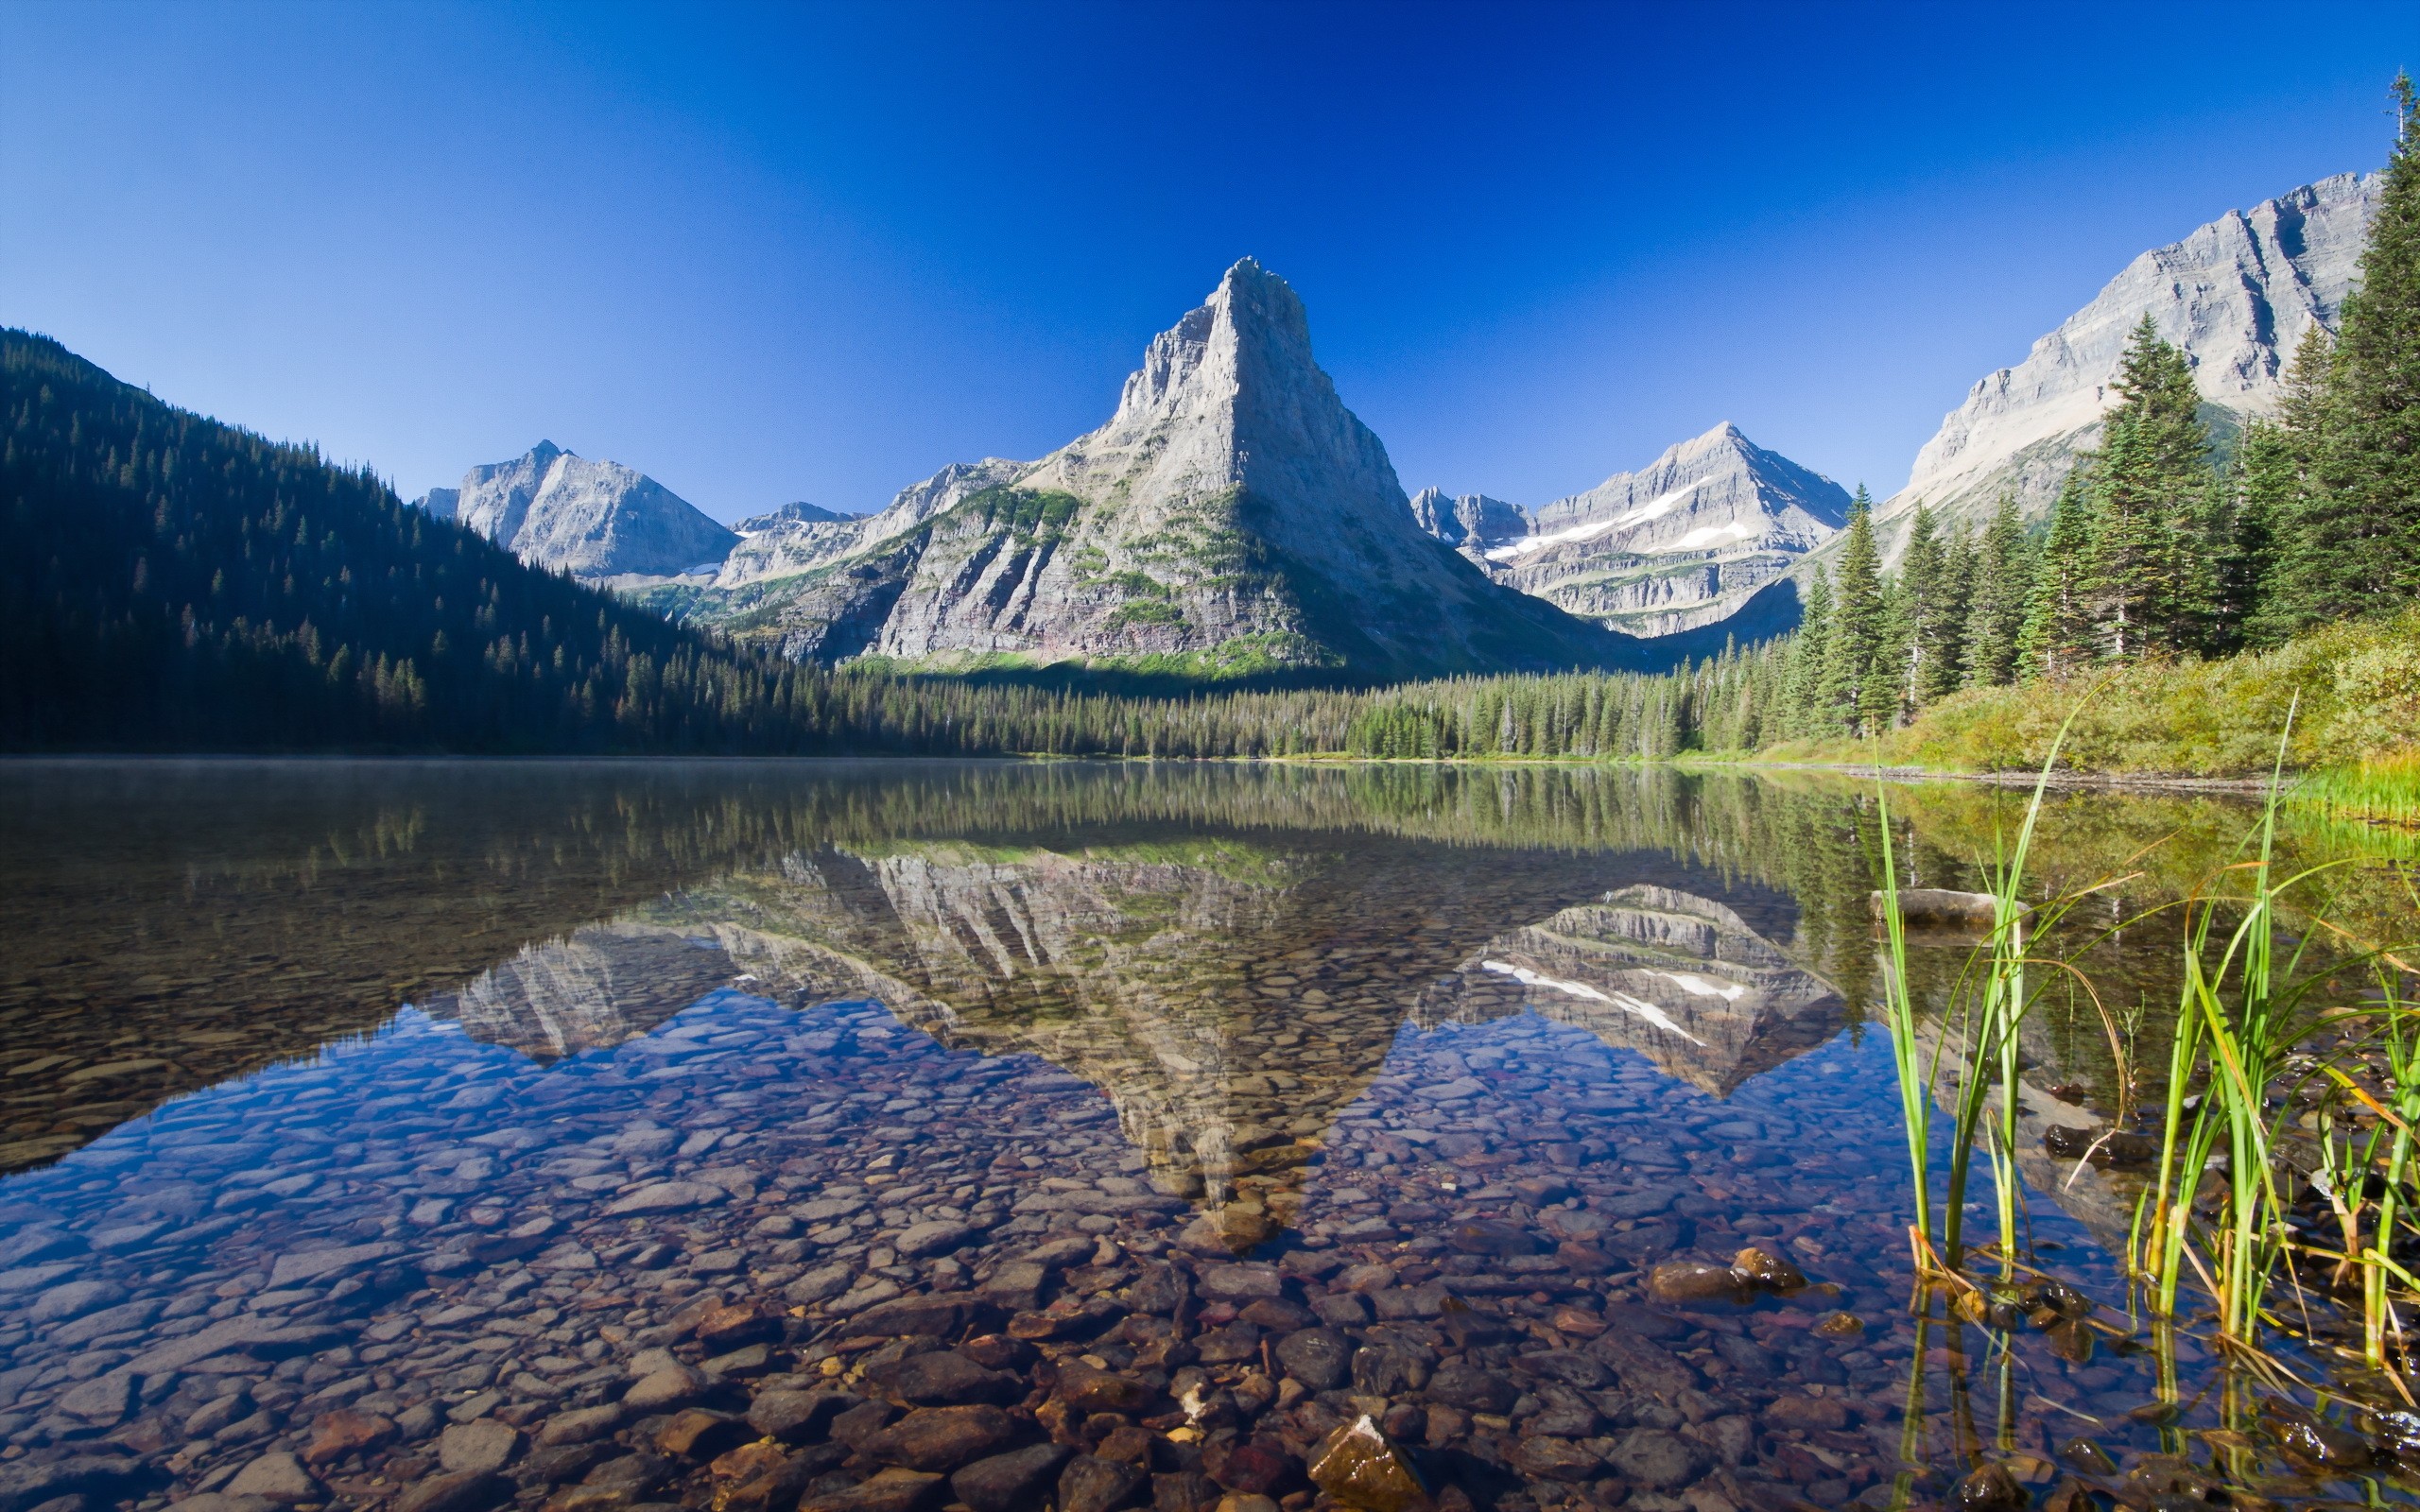 General 2560x1600 nature landscape mountains Glacier National Park Montana USA lake trees forest snow stones grass reflection